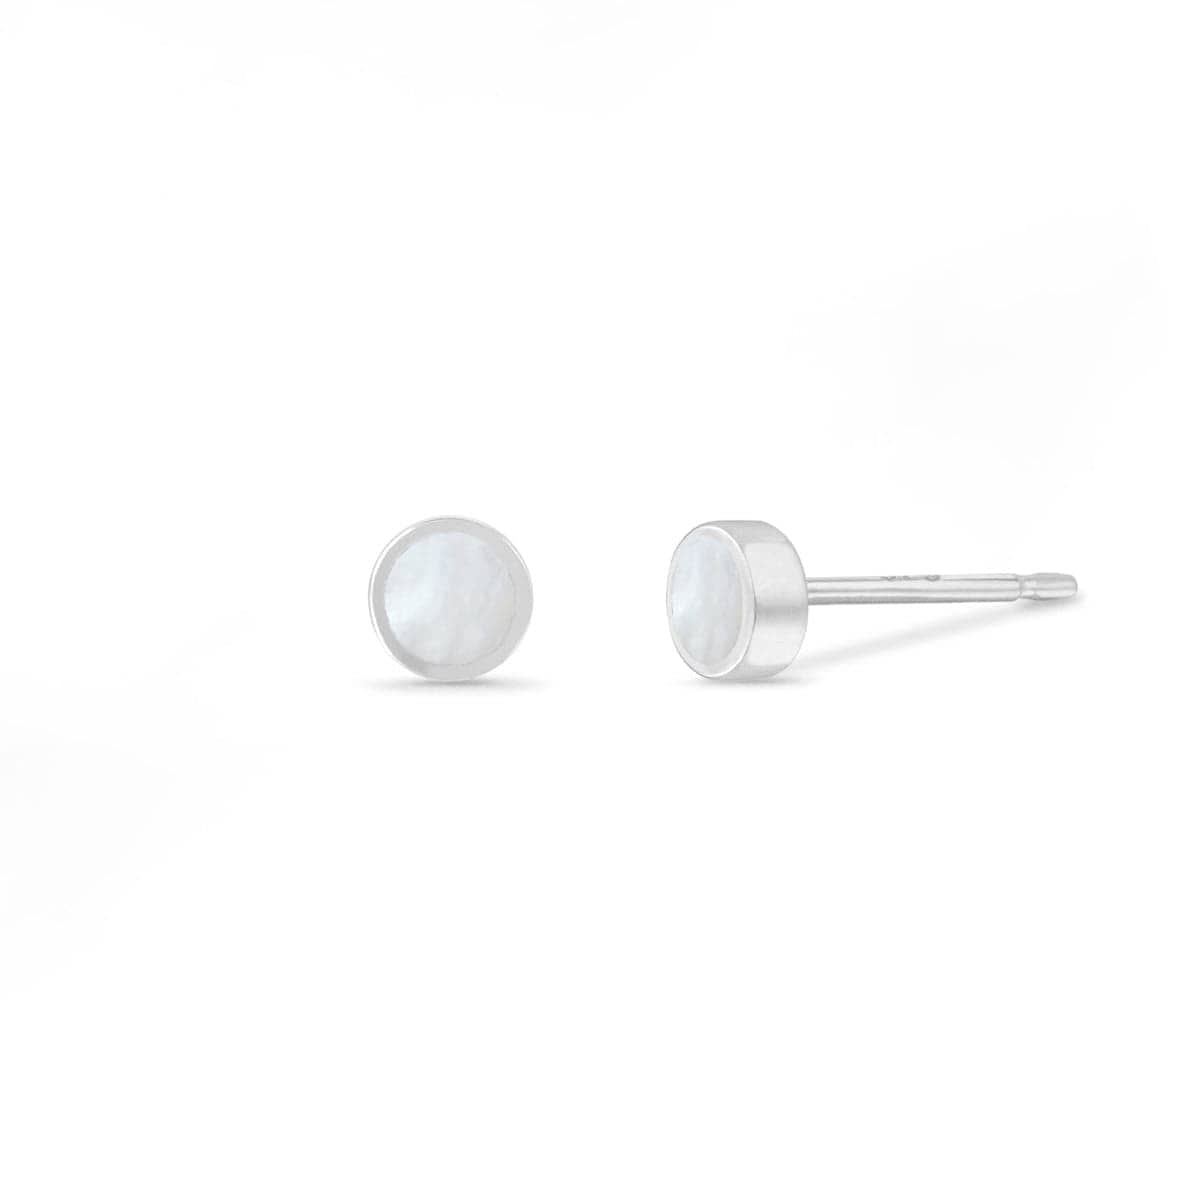 Boma Jewelry Earrings Belle Mini Studs with Stone